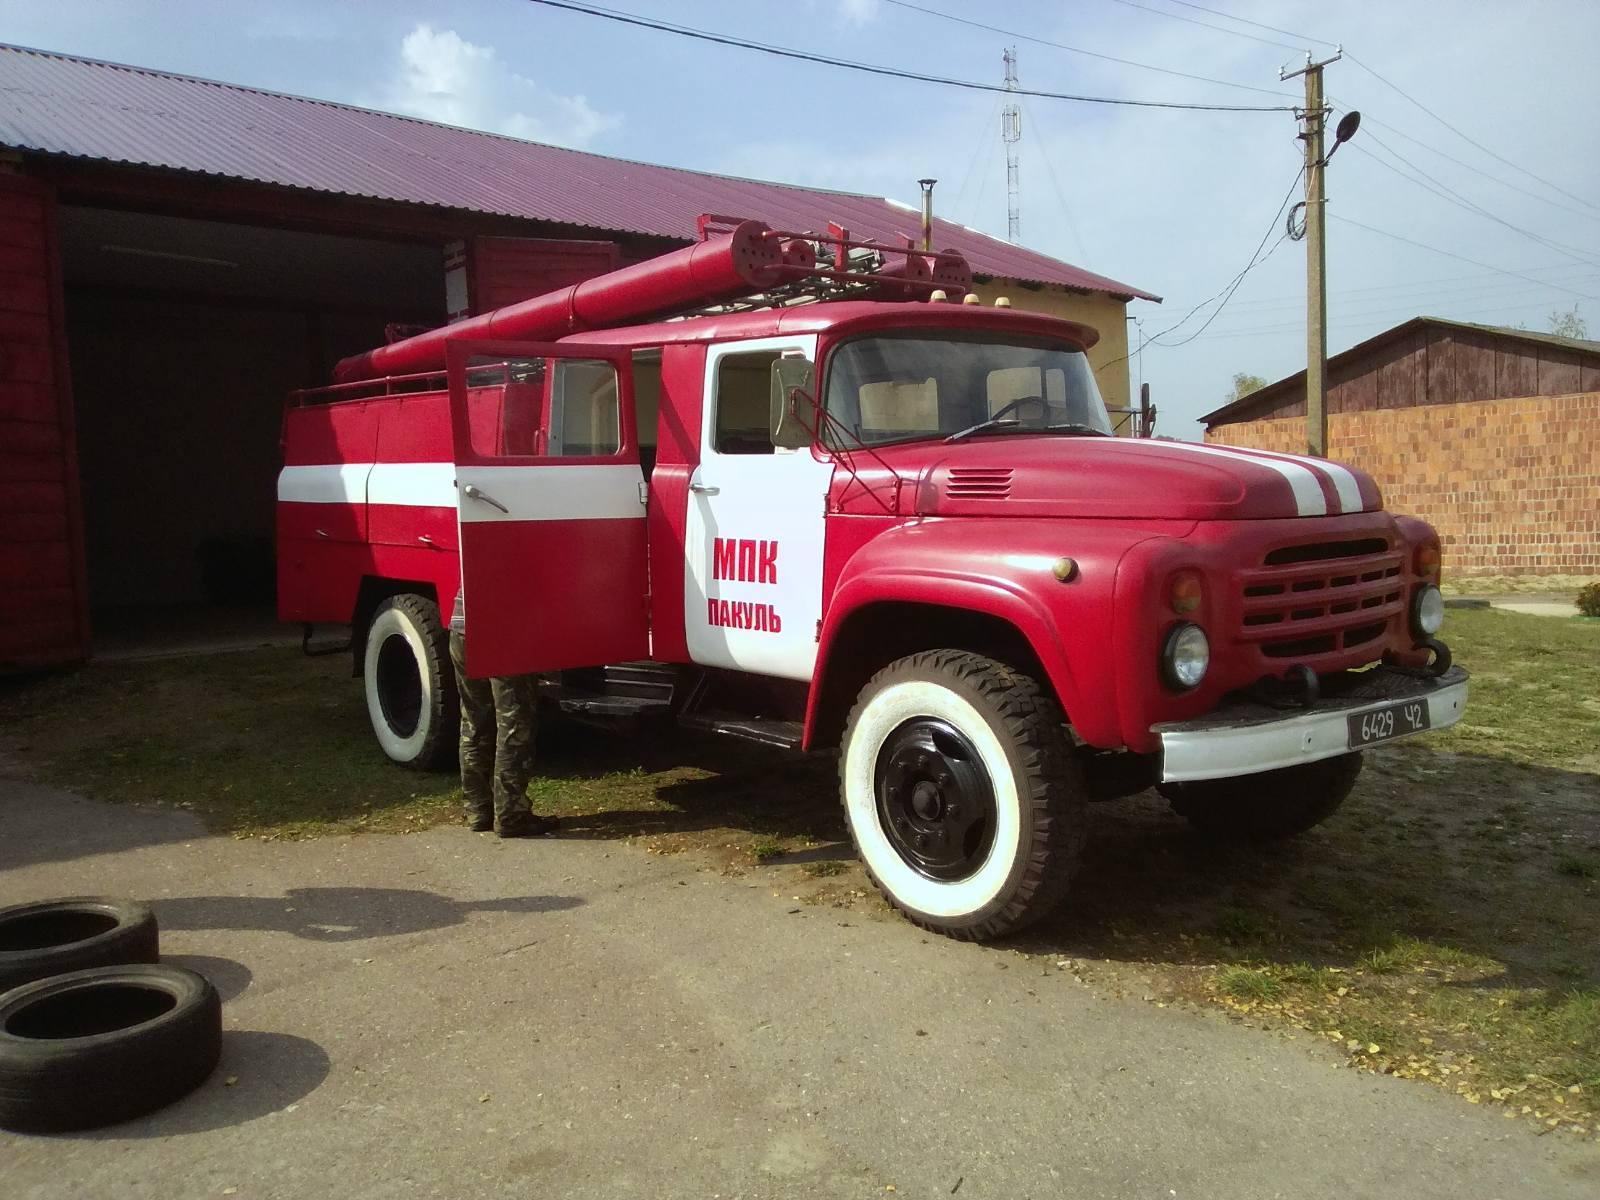 The fire truck of the volunteer fire brigade